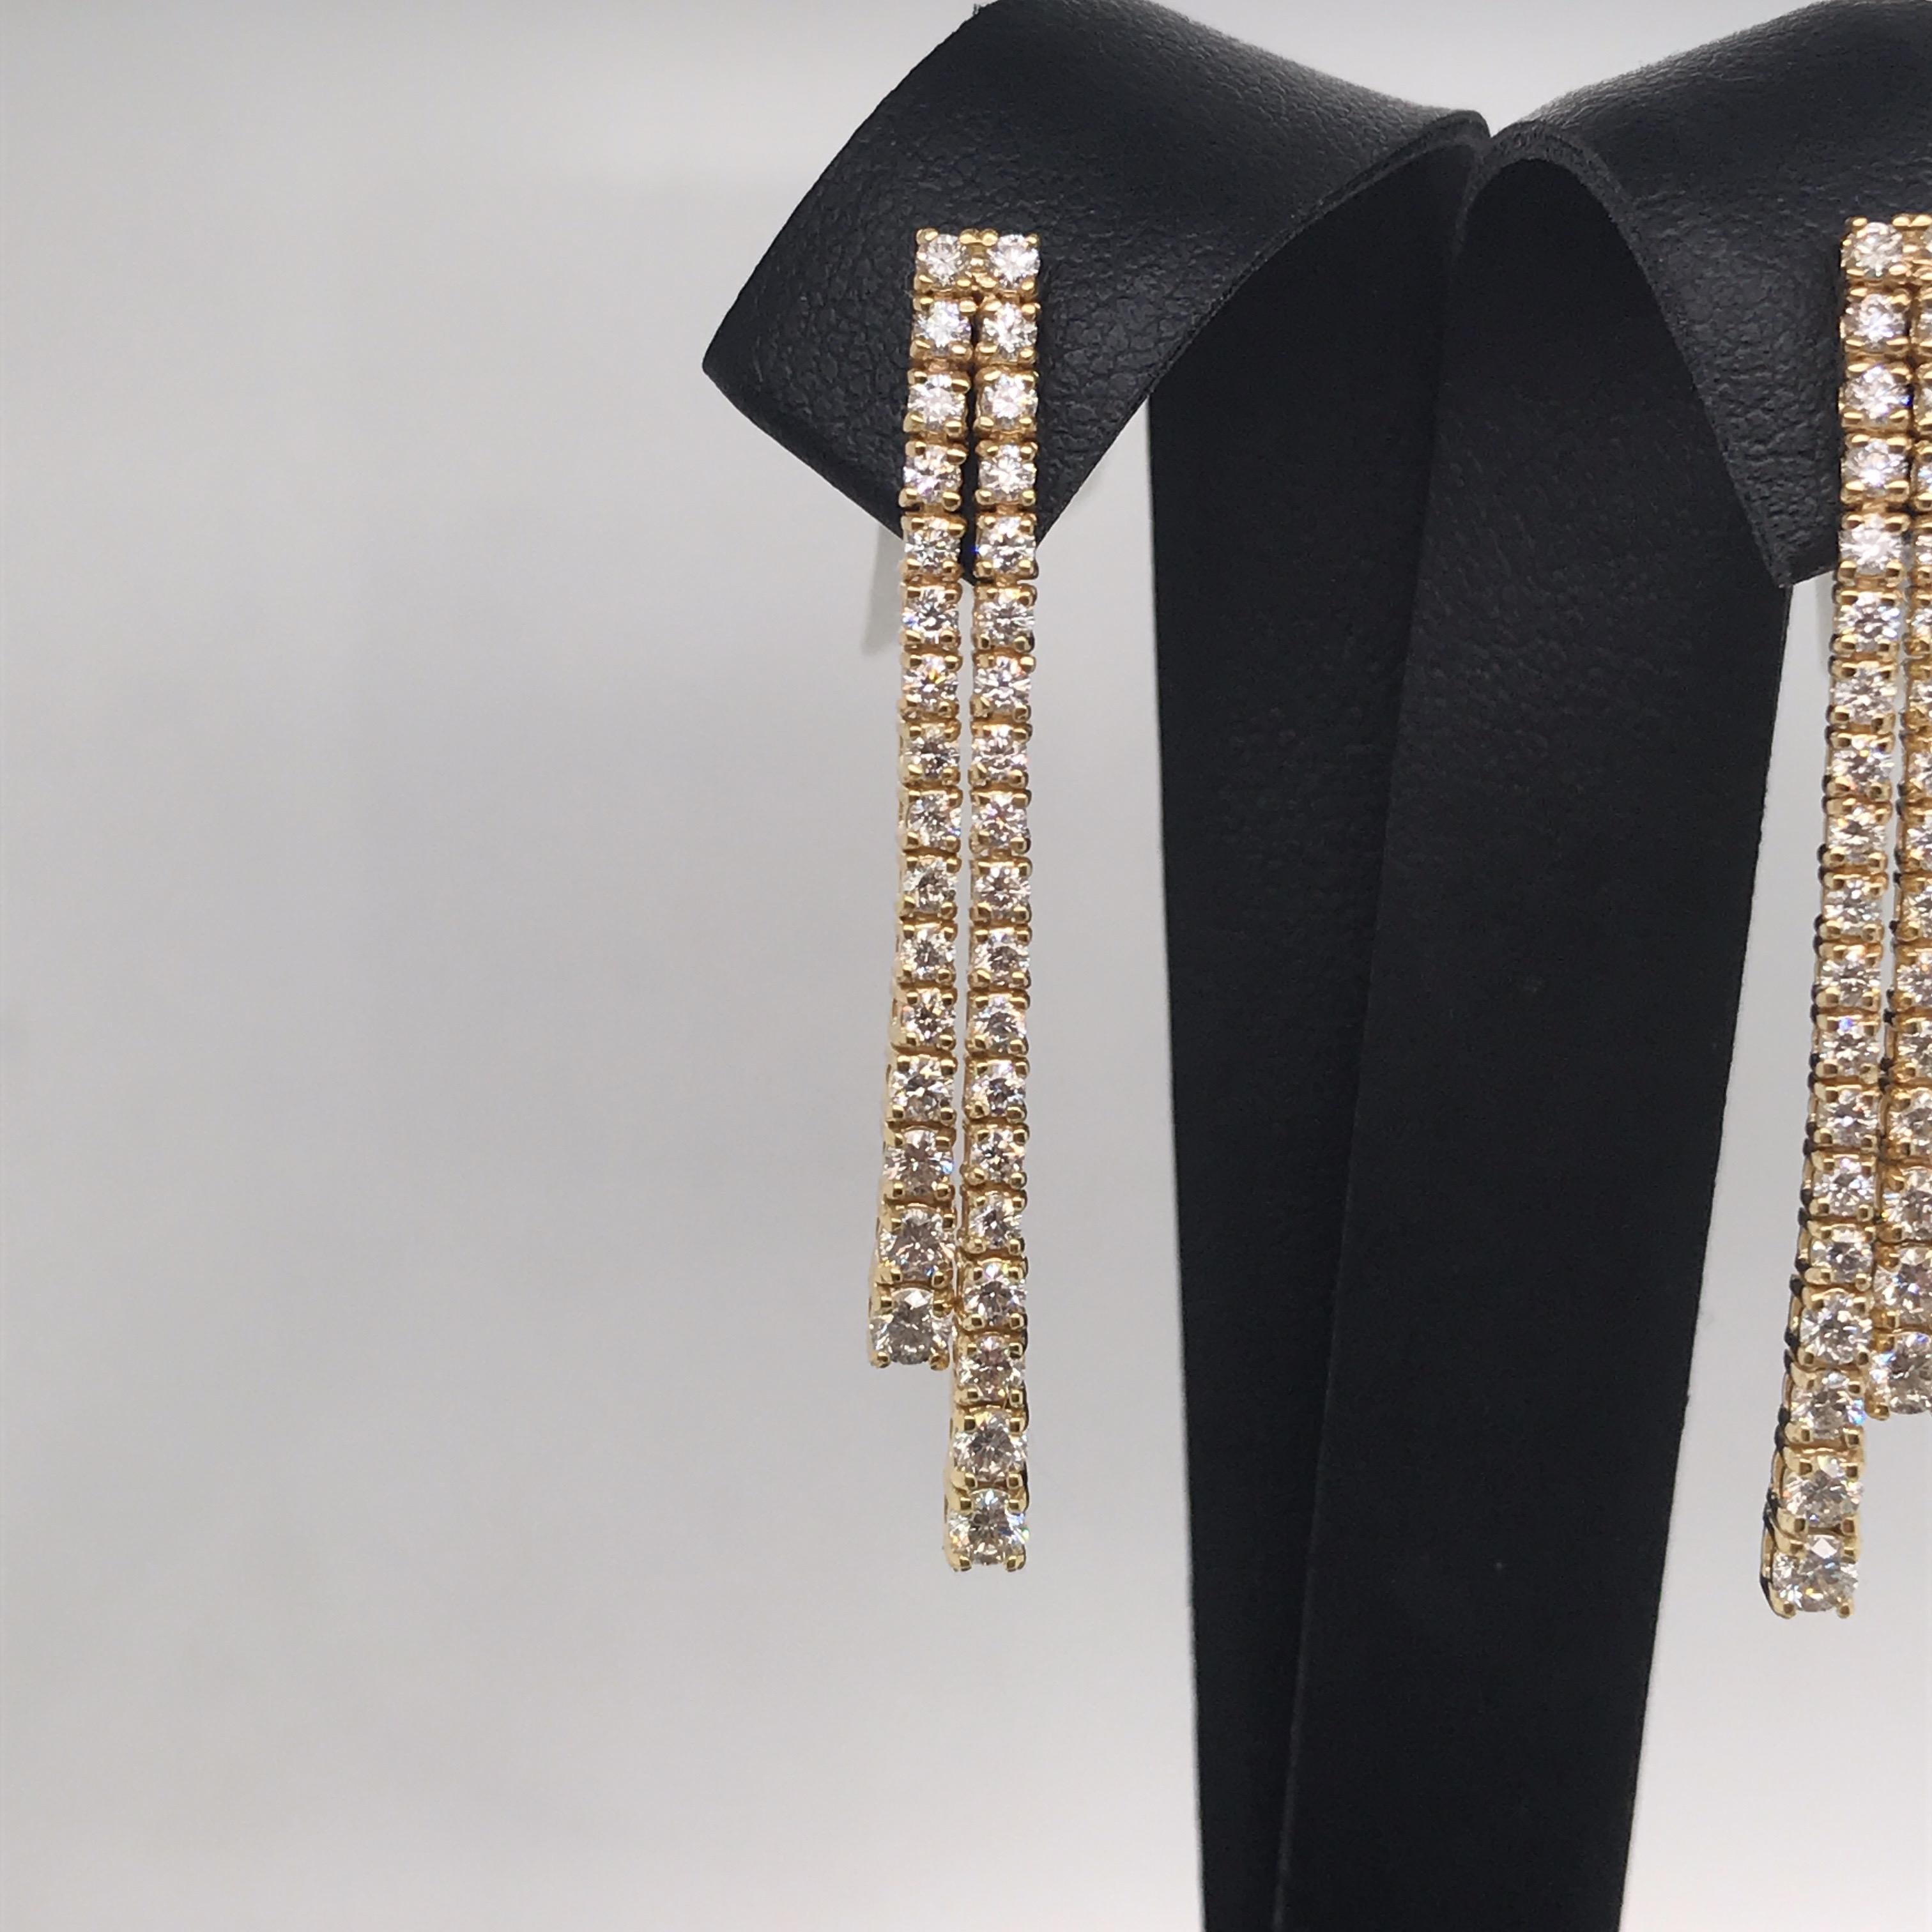 14K Yellow gold drop earrings featuring two diamond rows containing 70 round brilliants weighing 1.52 carats. 
Color G
Clarity SI2
Available in white gold. 